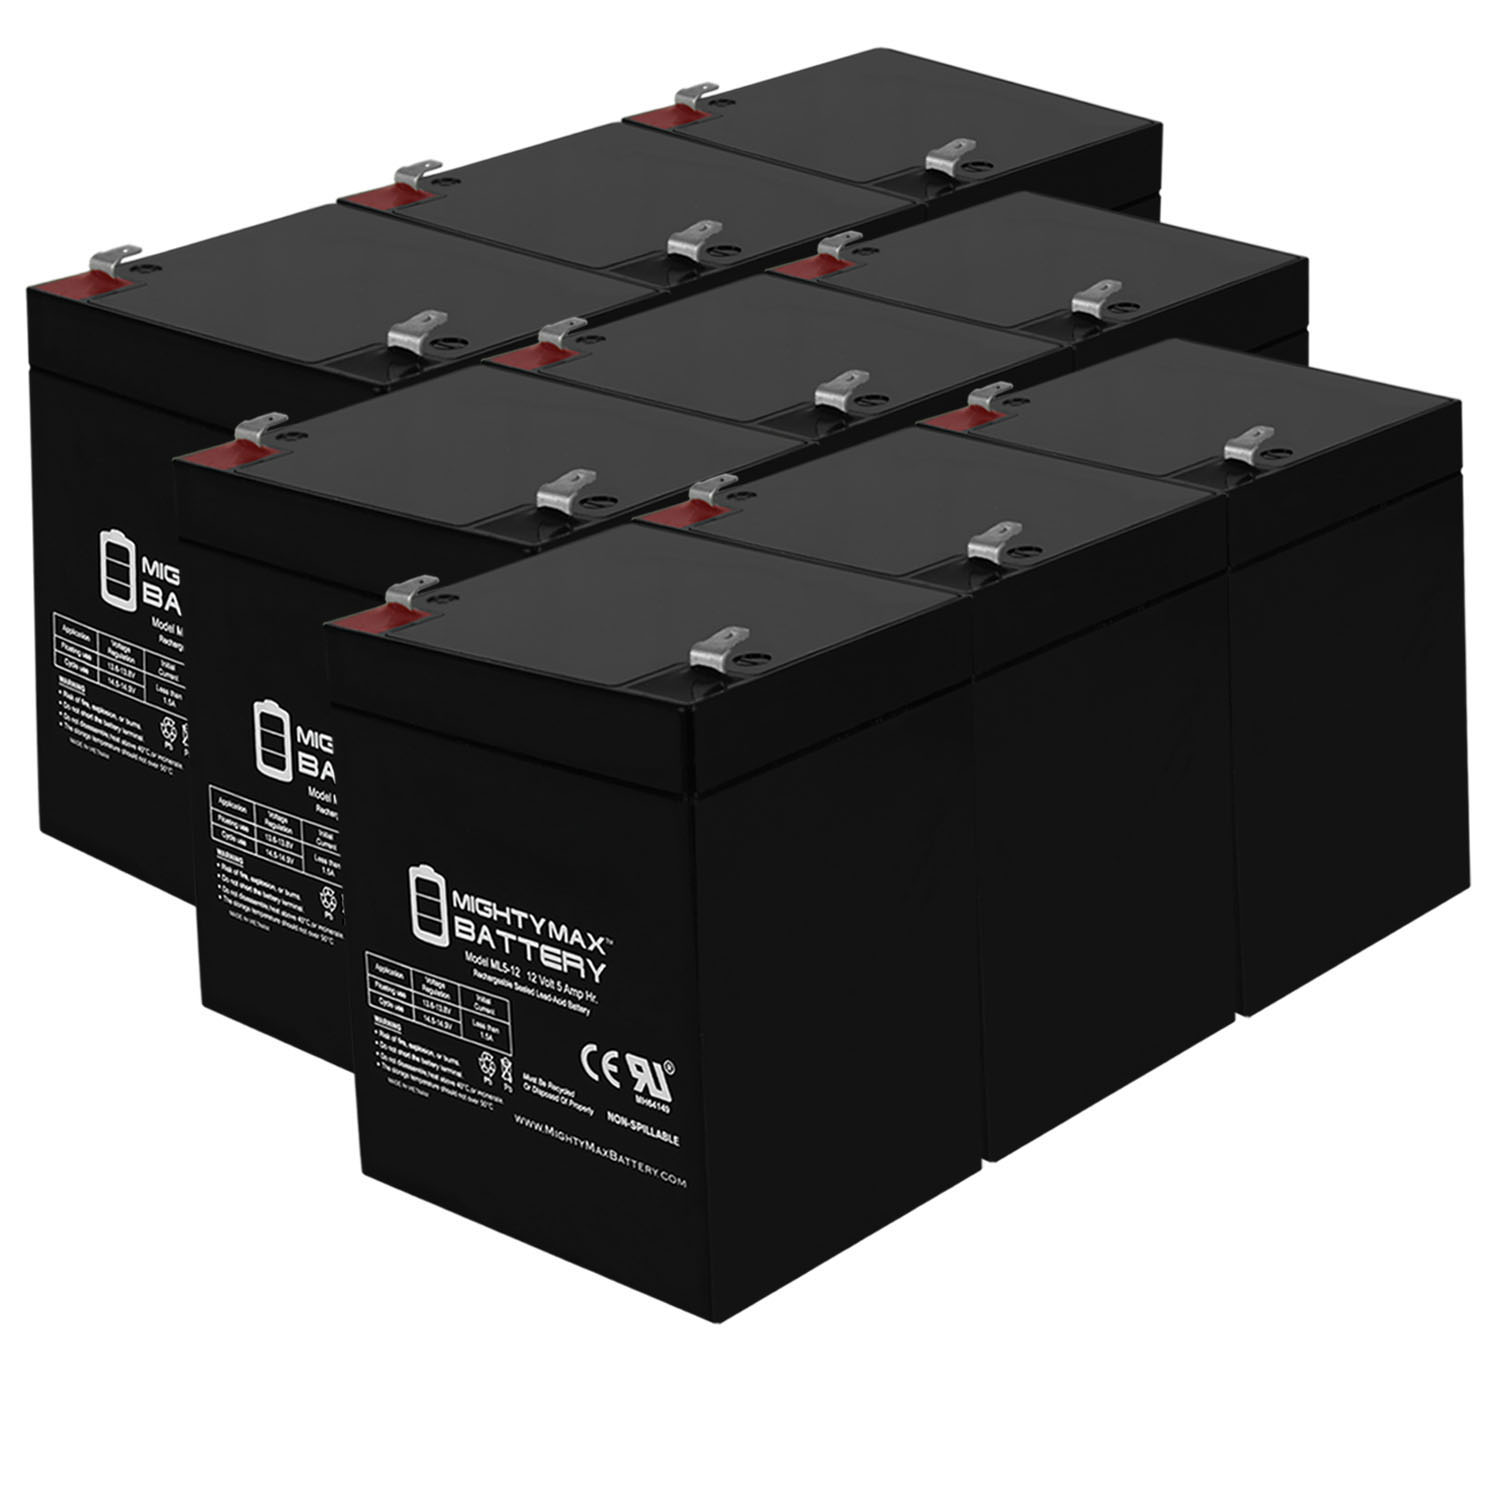 12V 5AH SLA Replacement Battery for Neata NT12-5A - 9 Pack